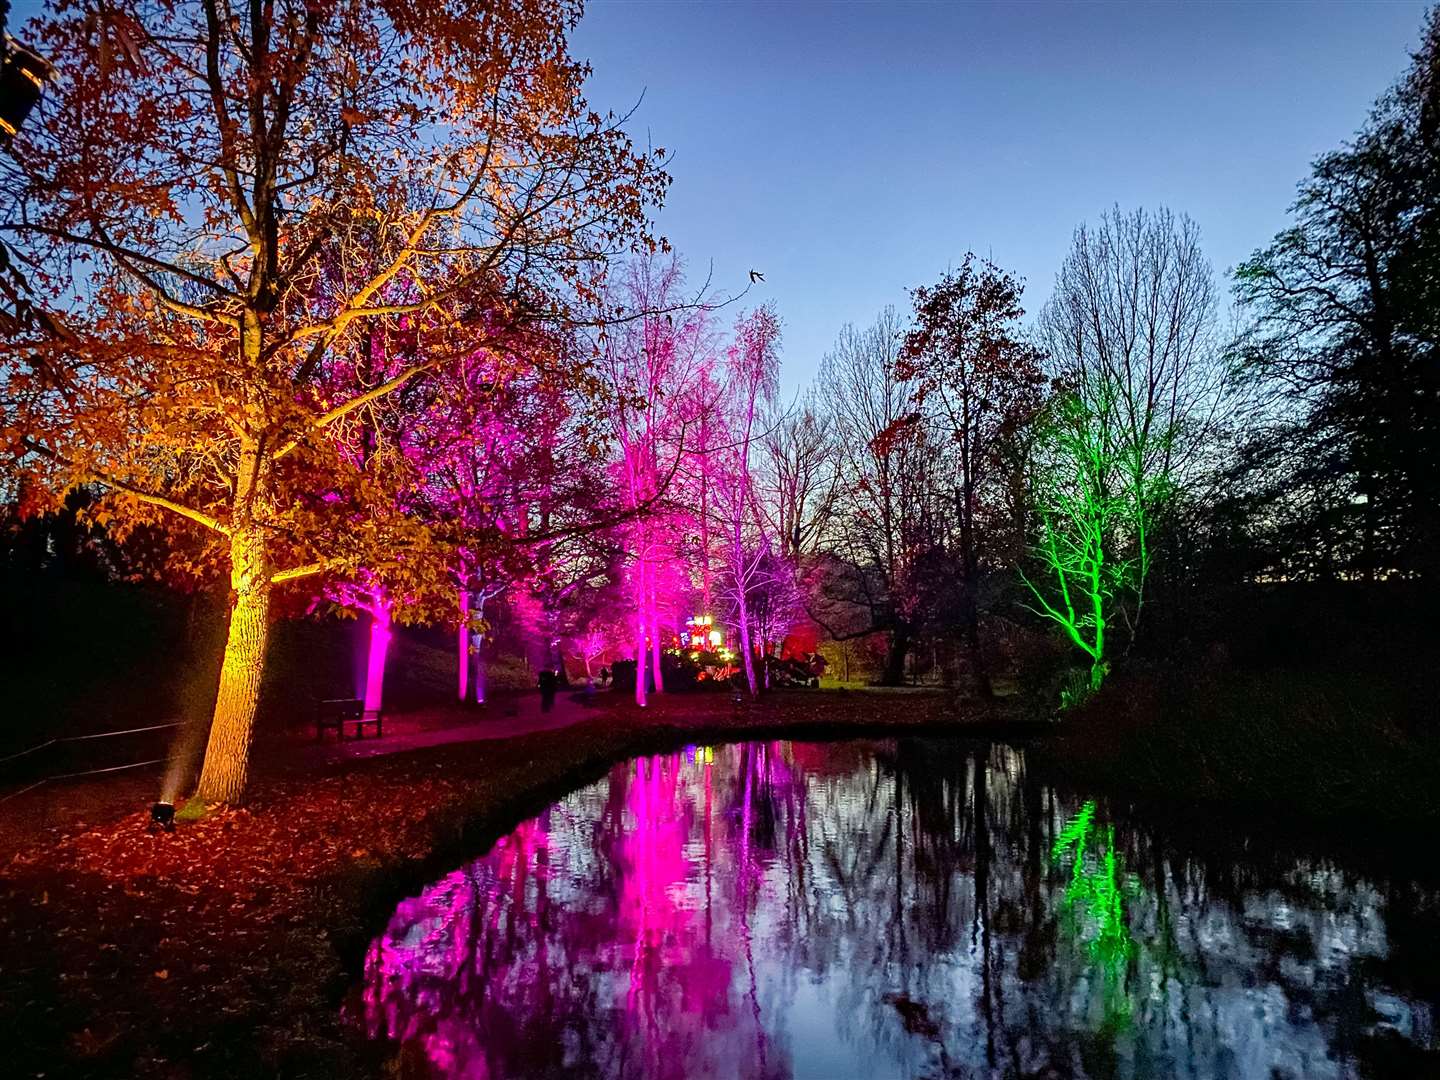 We visited the opening night of the Christmas at Leeds Castle light trail. All pictures: Sam Lawrie